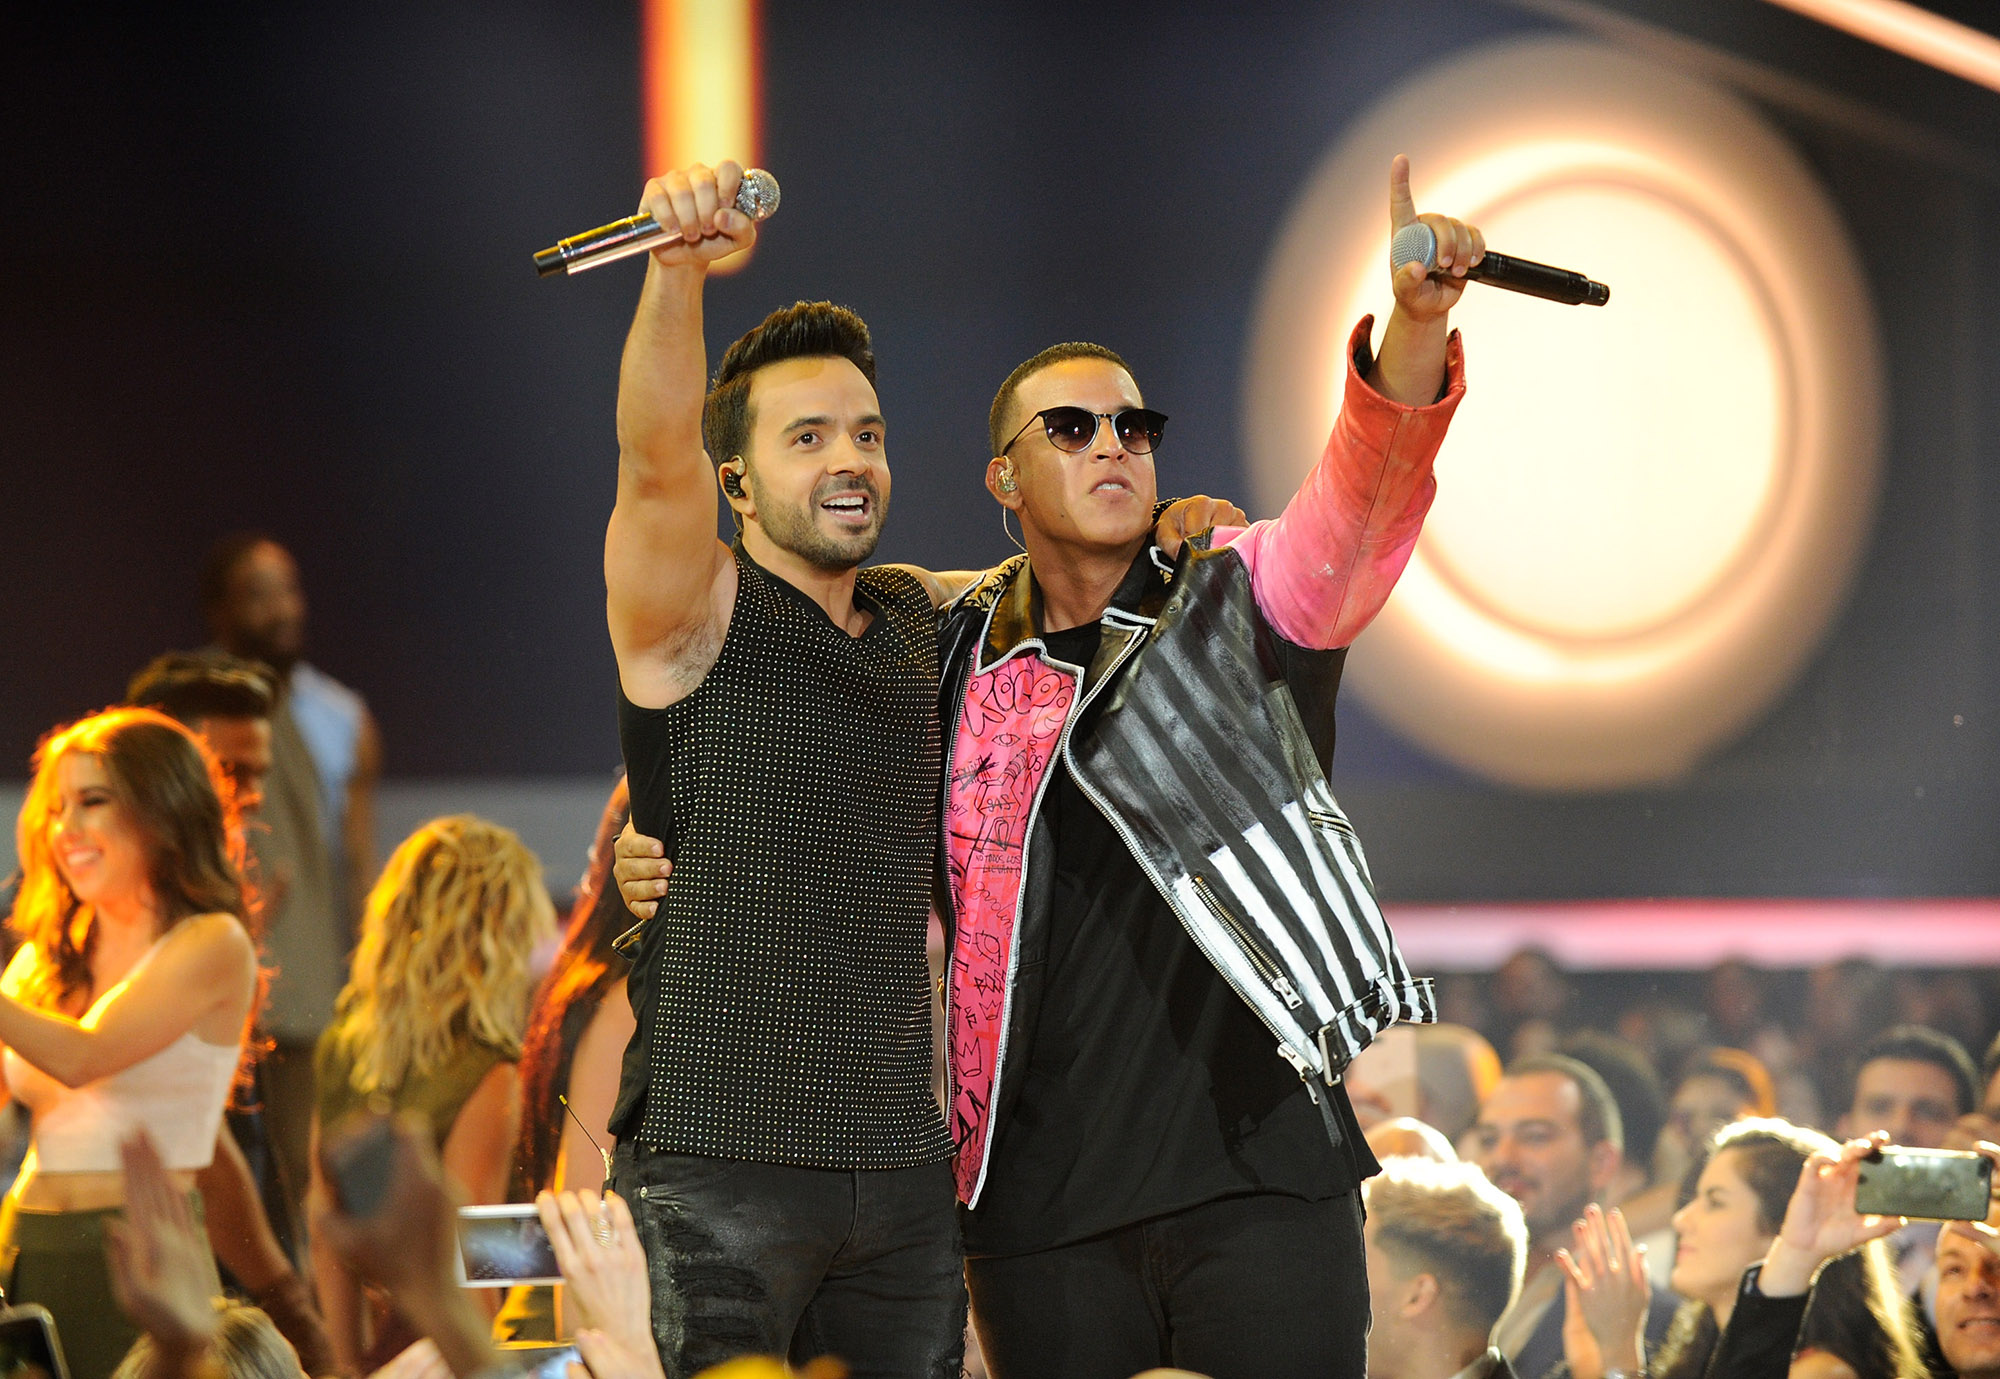 CORAL GABLES, FL - APRIL 27: Luis Fonsi and Daddy Yankee perform onstage at the Billboard Latin Music Awards at Watsco Center on April 27, 2017 in Coral Gables, Florida. (Photo by Sergi Alexander/Getty Images)